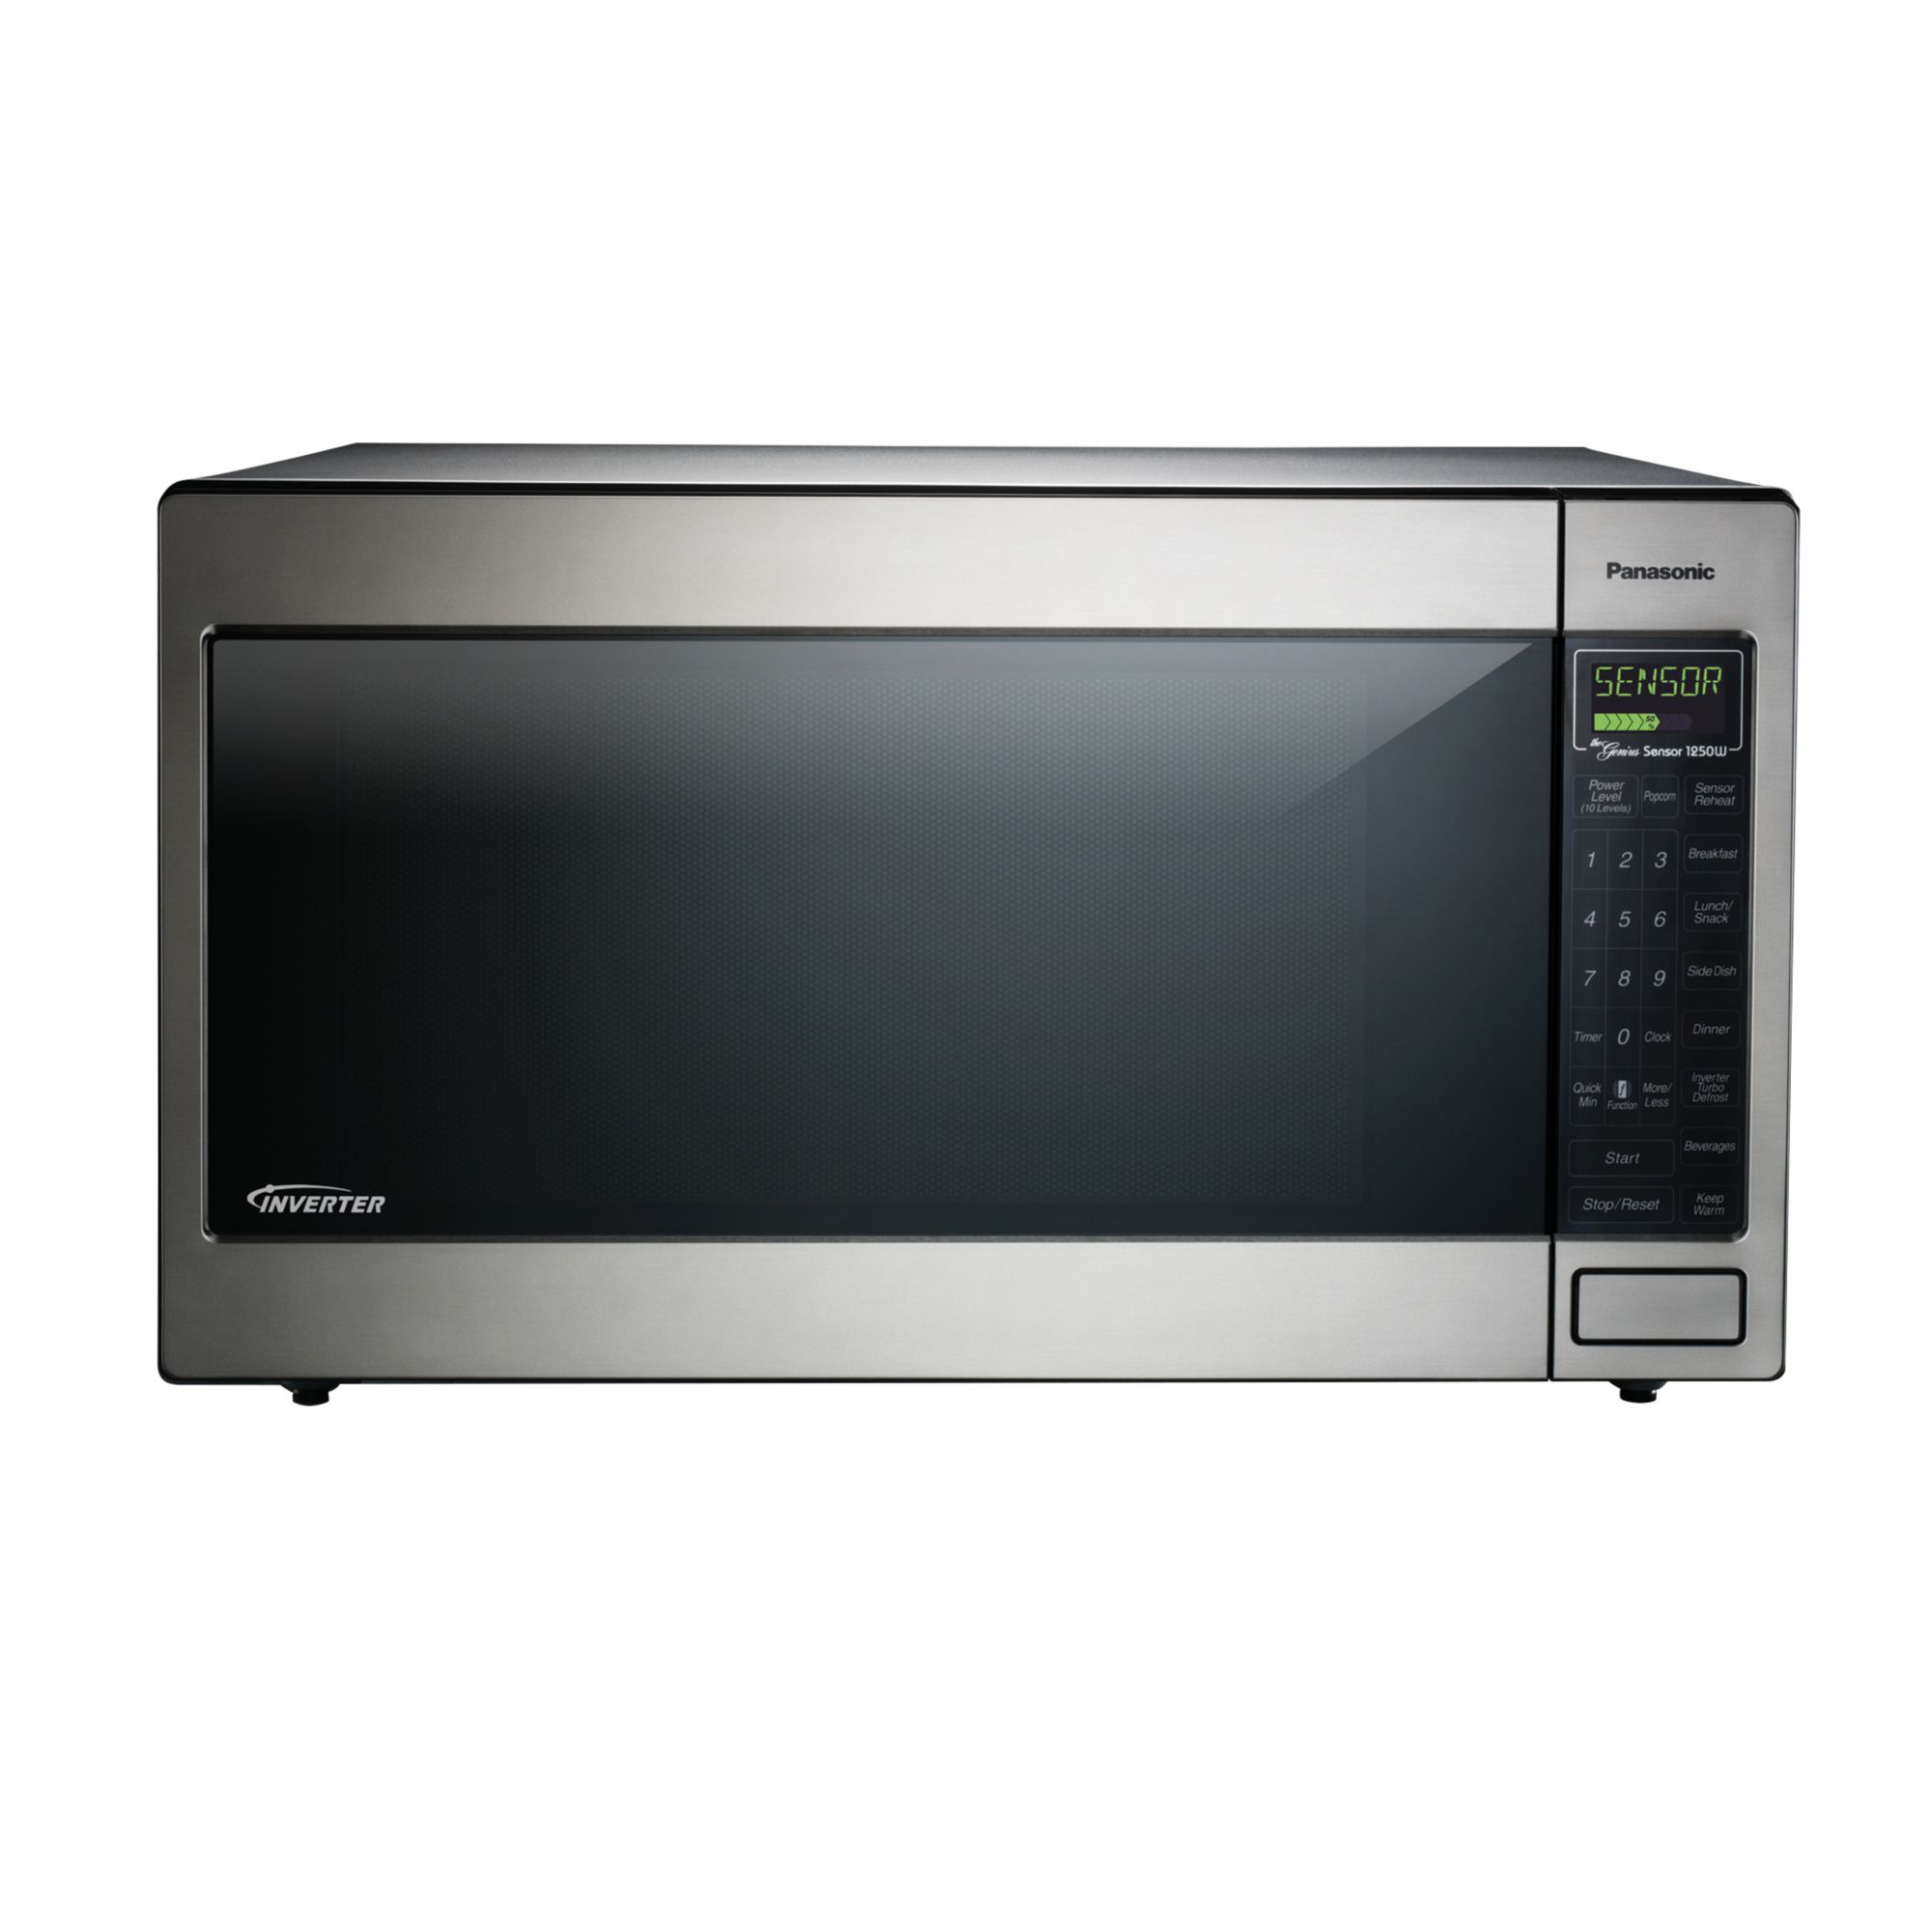 1.1 cu. ft. Countertop Microwave Oven with Baking Oven